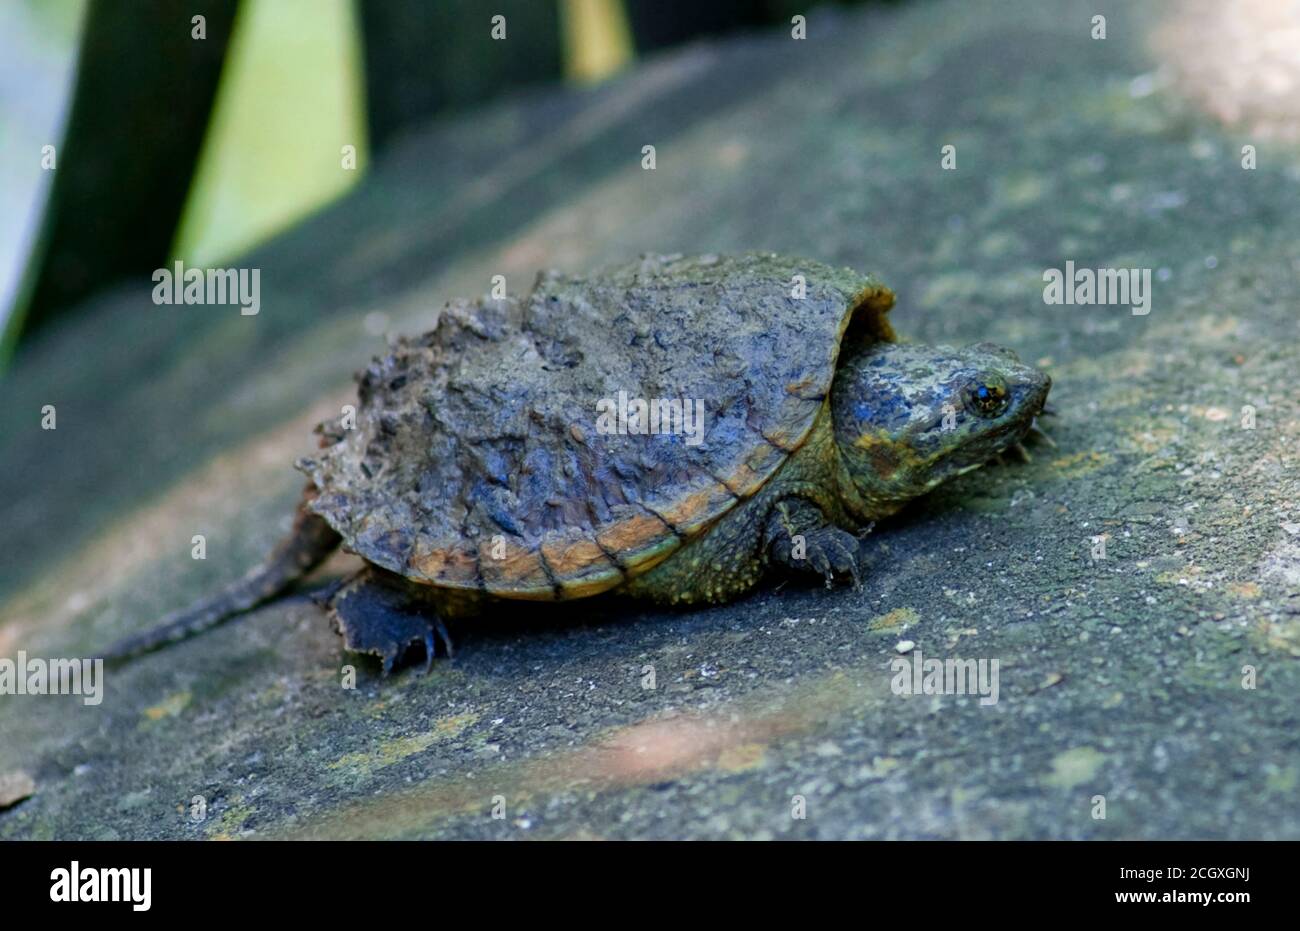 Baby Alligator snapping turtle, Challenger 7 Park, League City, Texas Stock Photo